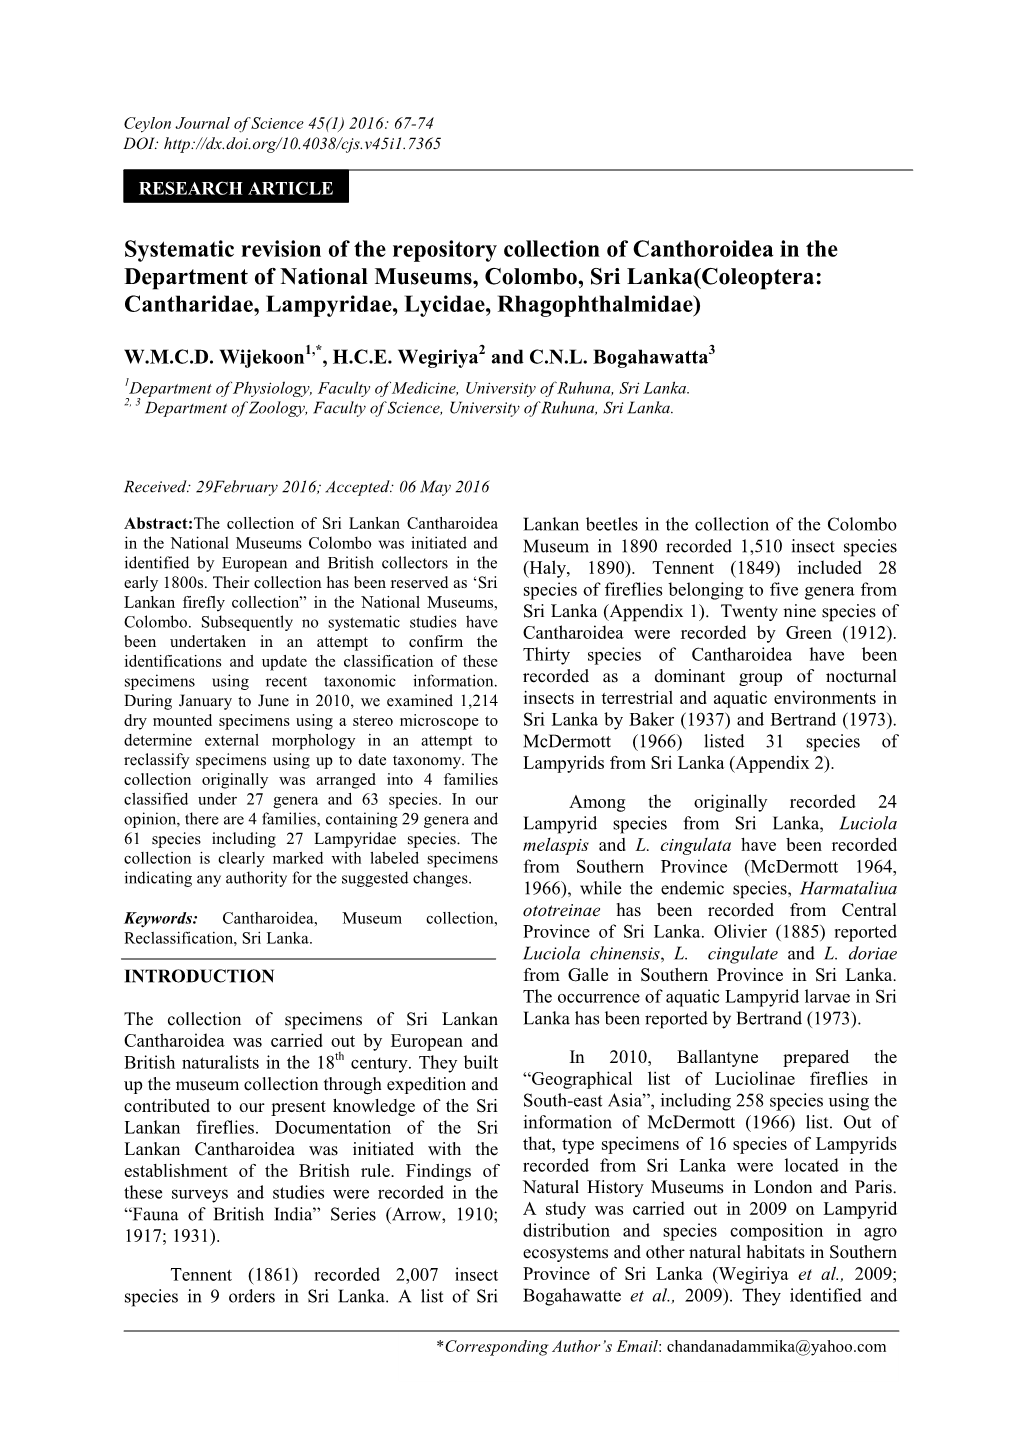 Systematic Revision of the Repository Collection of Canthoroidea in The